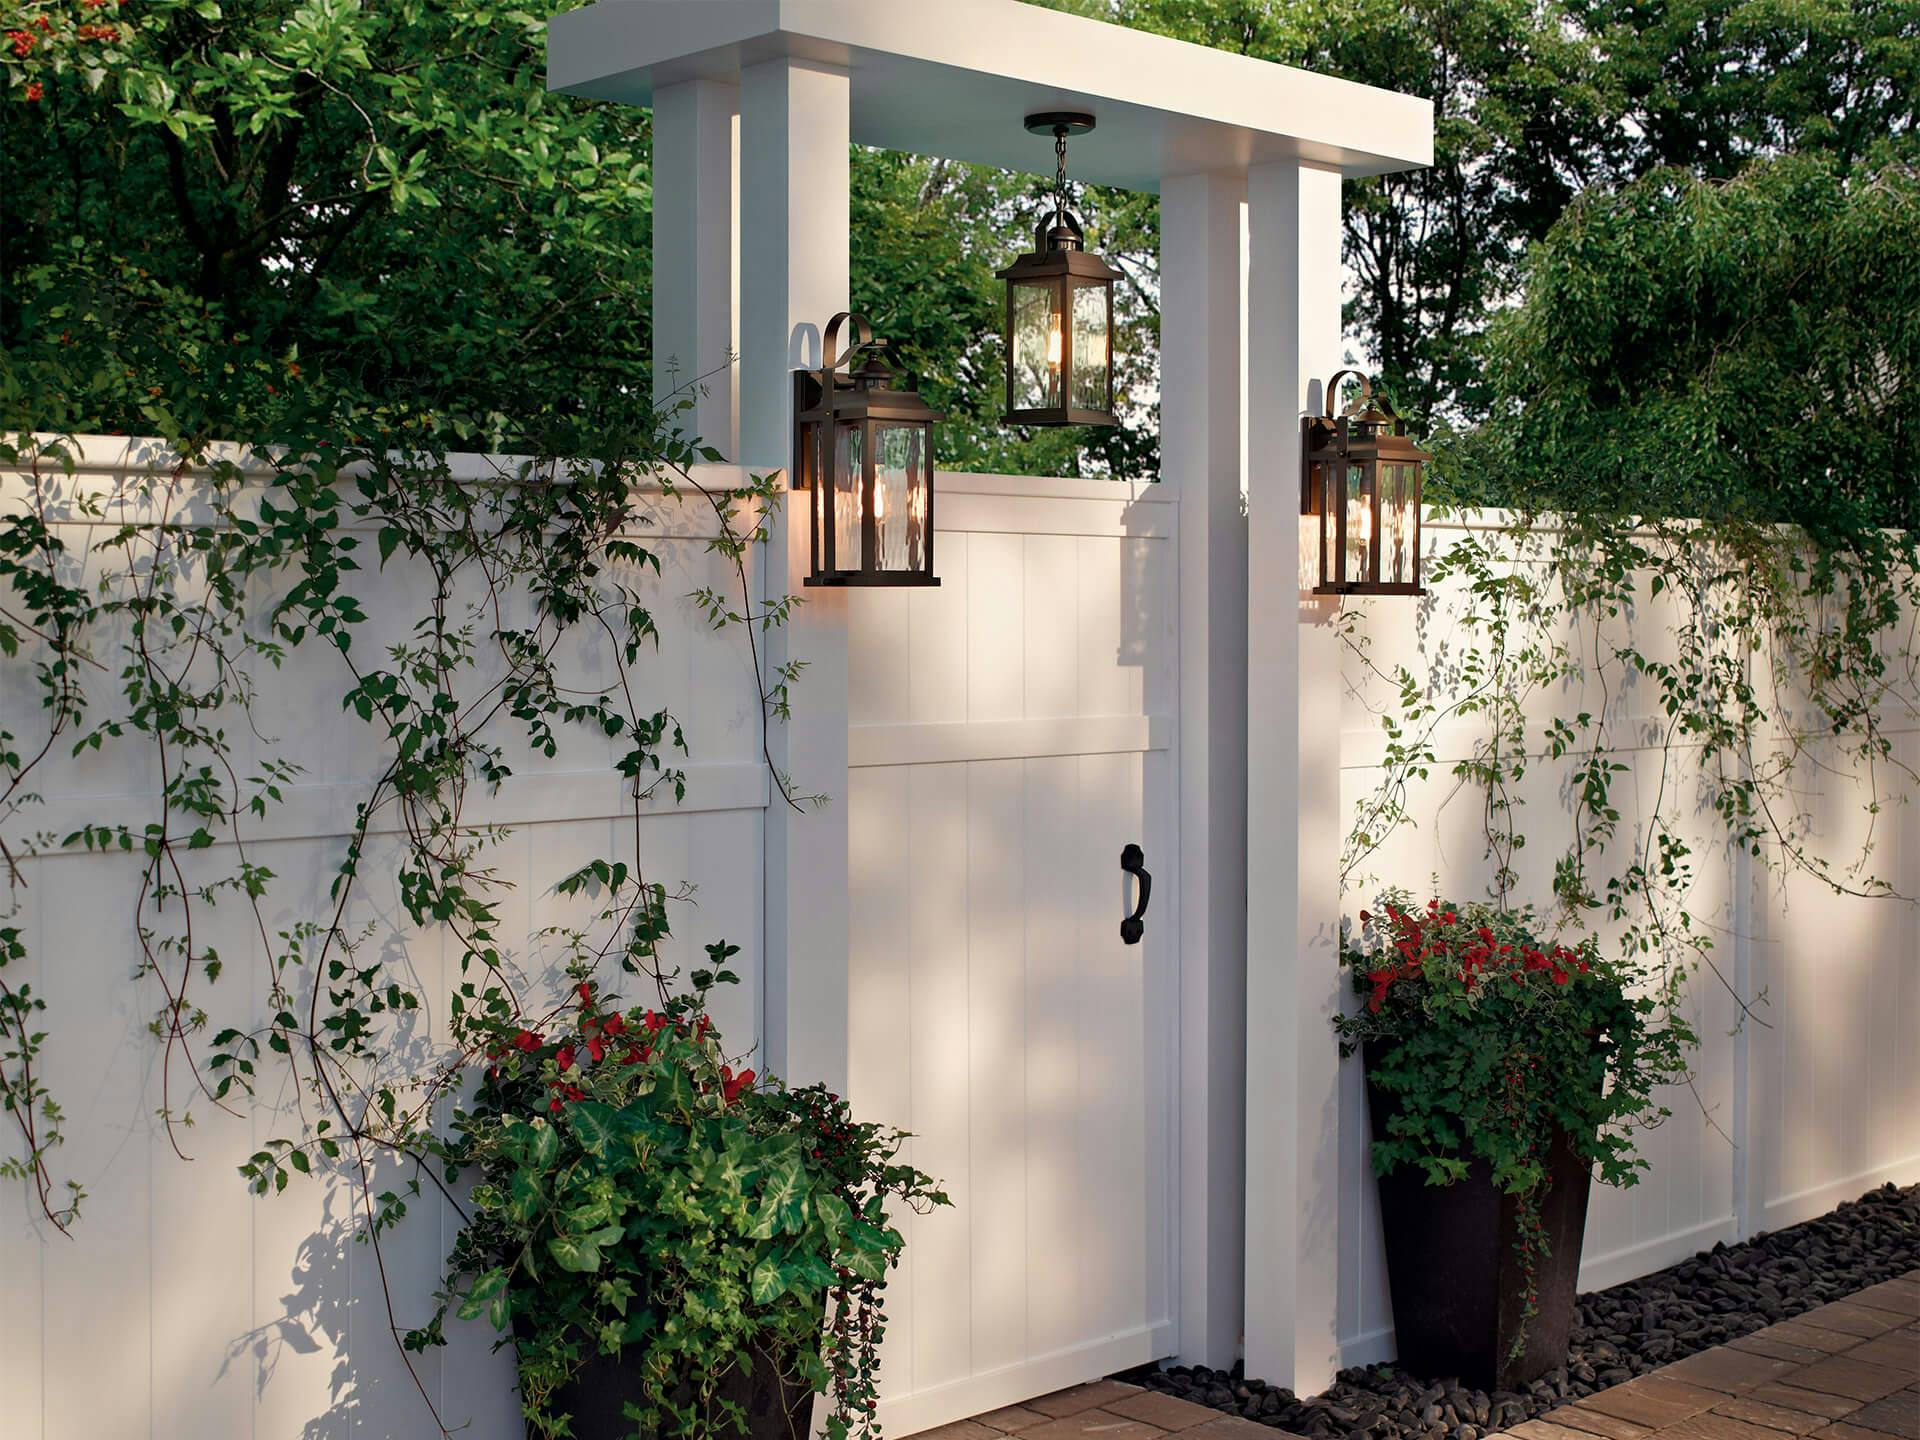 Exterior image of a wooden garden wall entrance lit with Linford exterior wall and pendant lights during the day